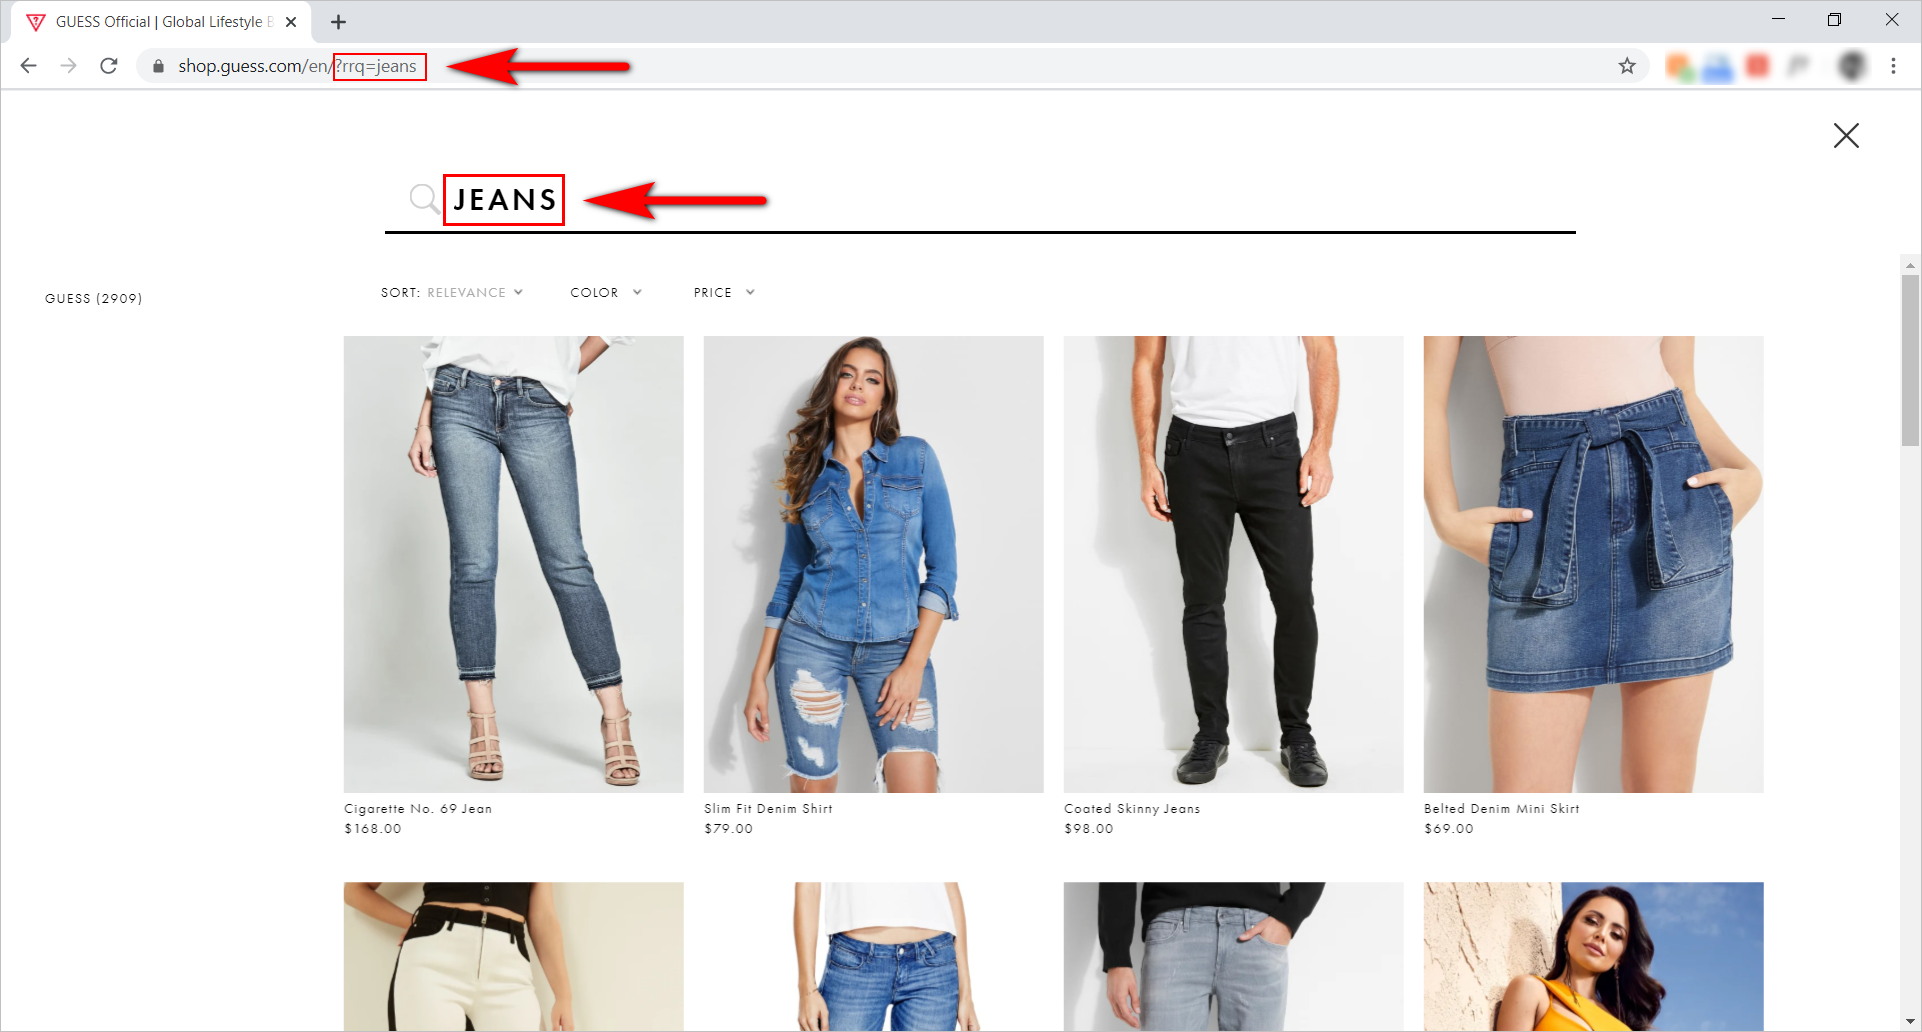 identifying url parameter for on-site search tracking example - shop.guess.com/en/ search results page for "jeans" showing shop.guess.com/en/?rrq=jeans as the URL